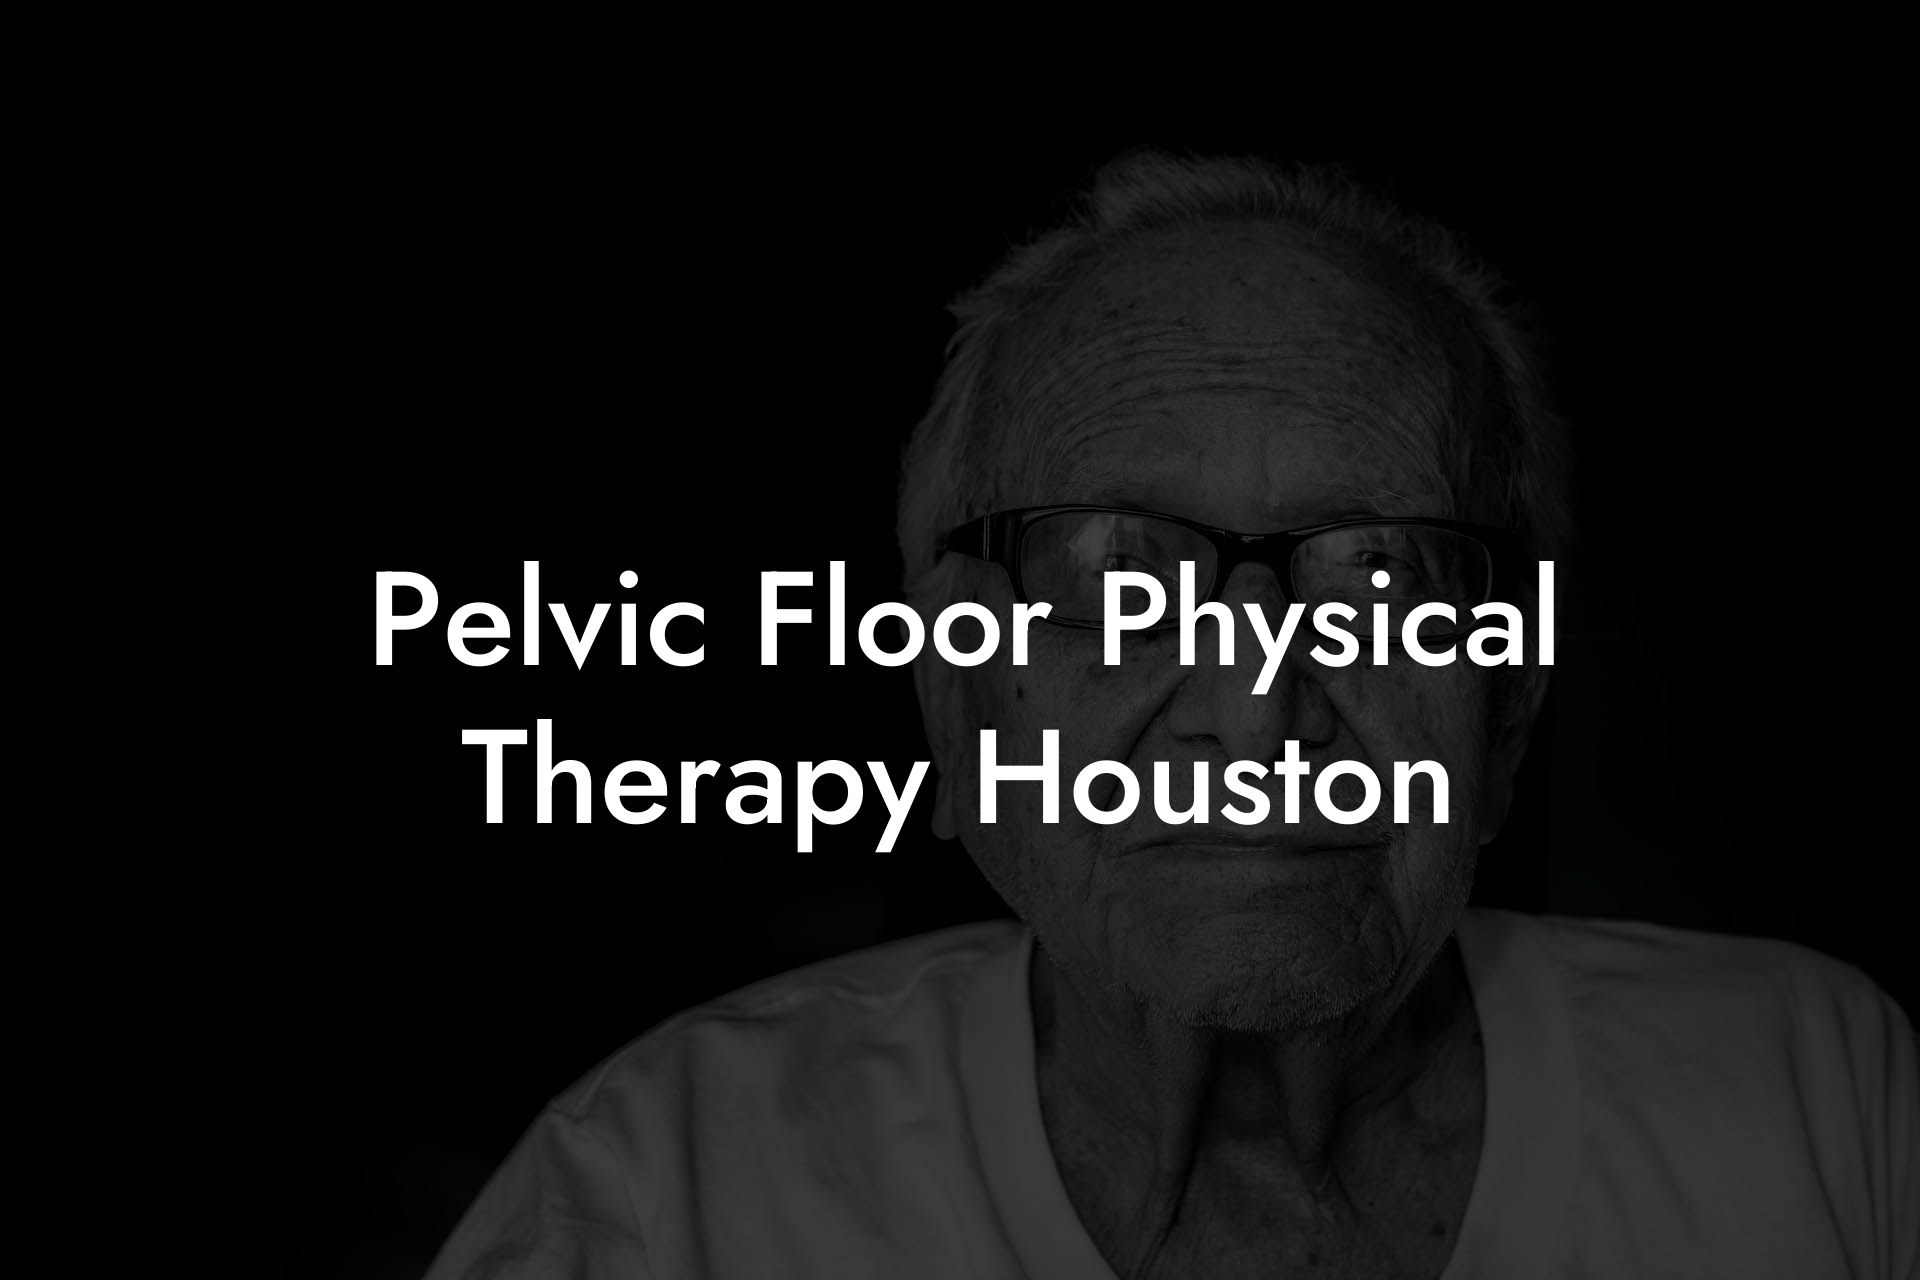 Pelvic Floor Physical Therapy Houston